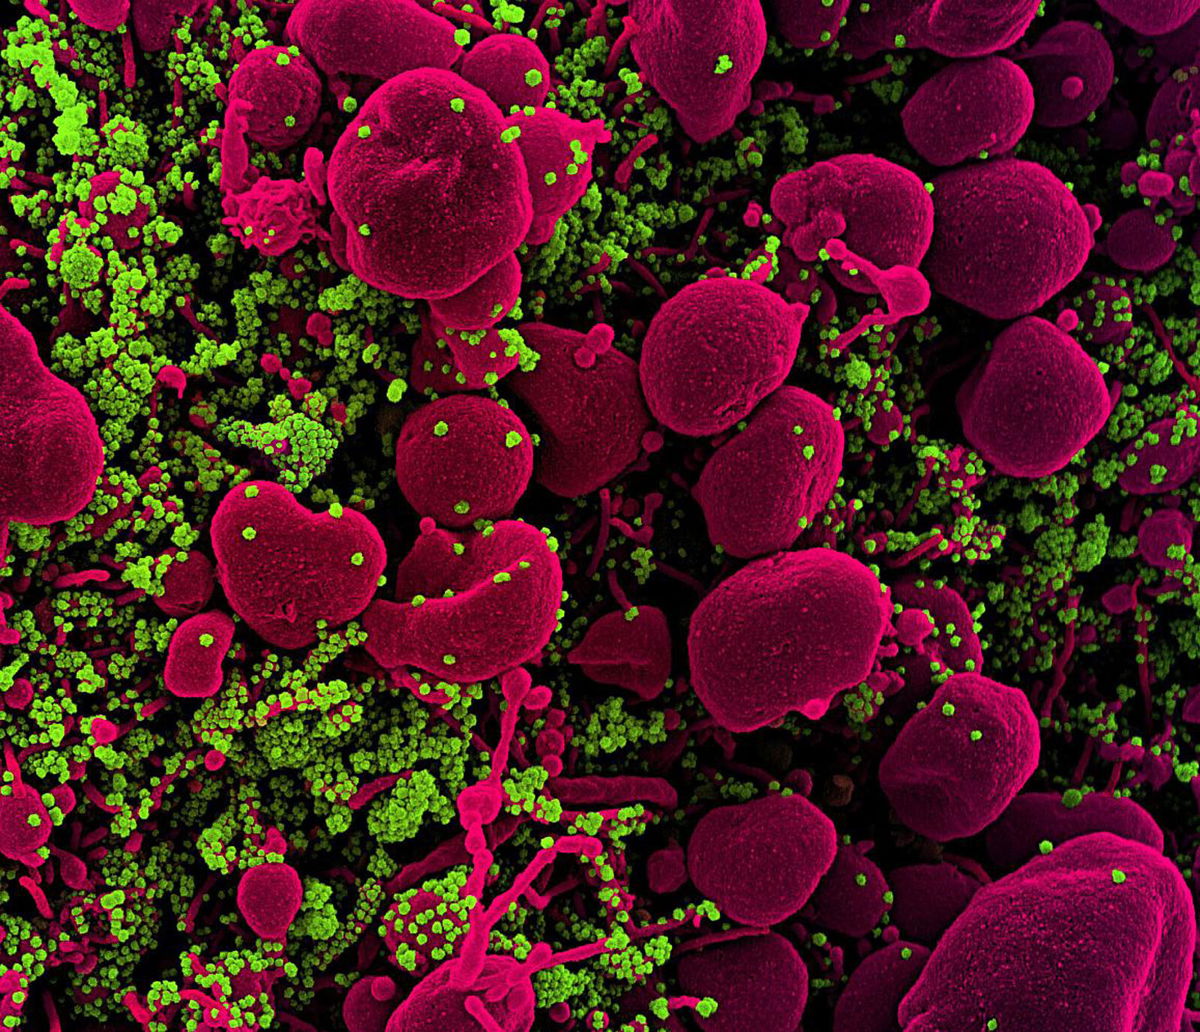 <i>NIAID</i><br/>Colorized scanning electron micrograph of an apoptotic cell (pink) heavily infected with SARS-COV-2 virus particles.